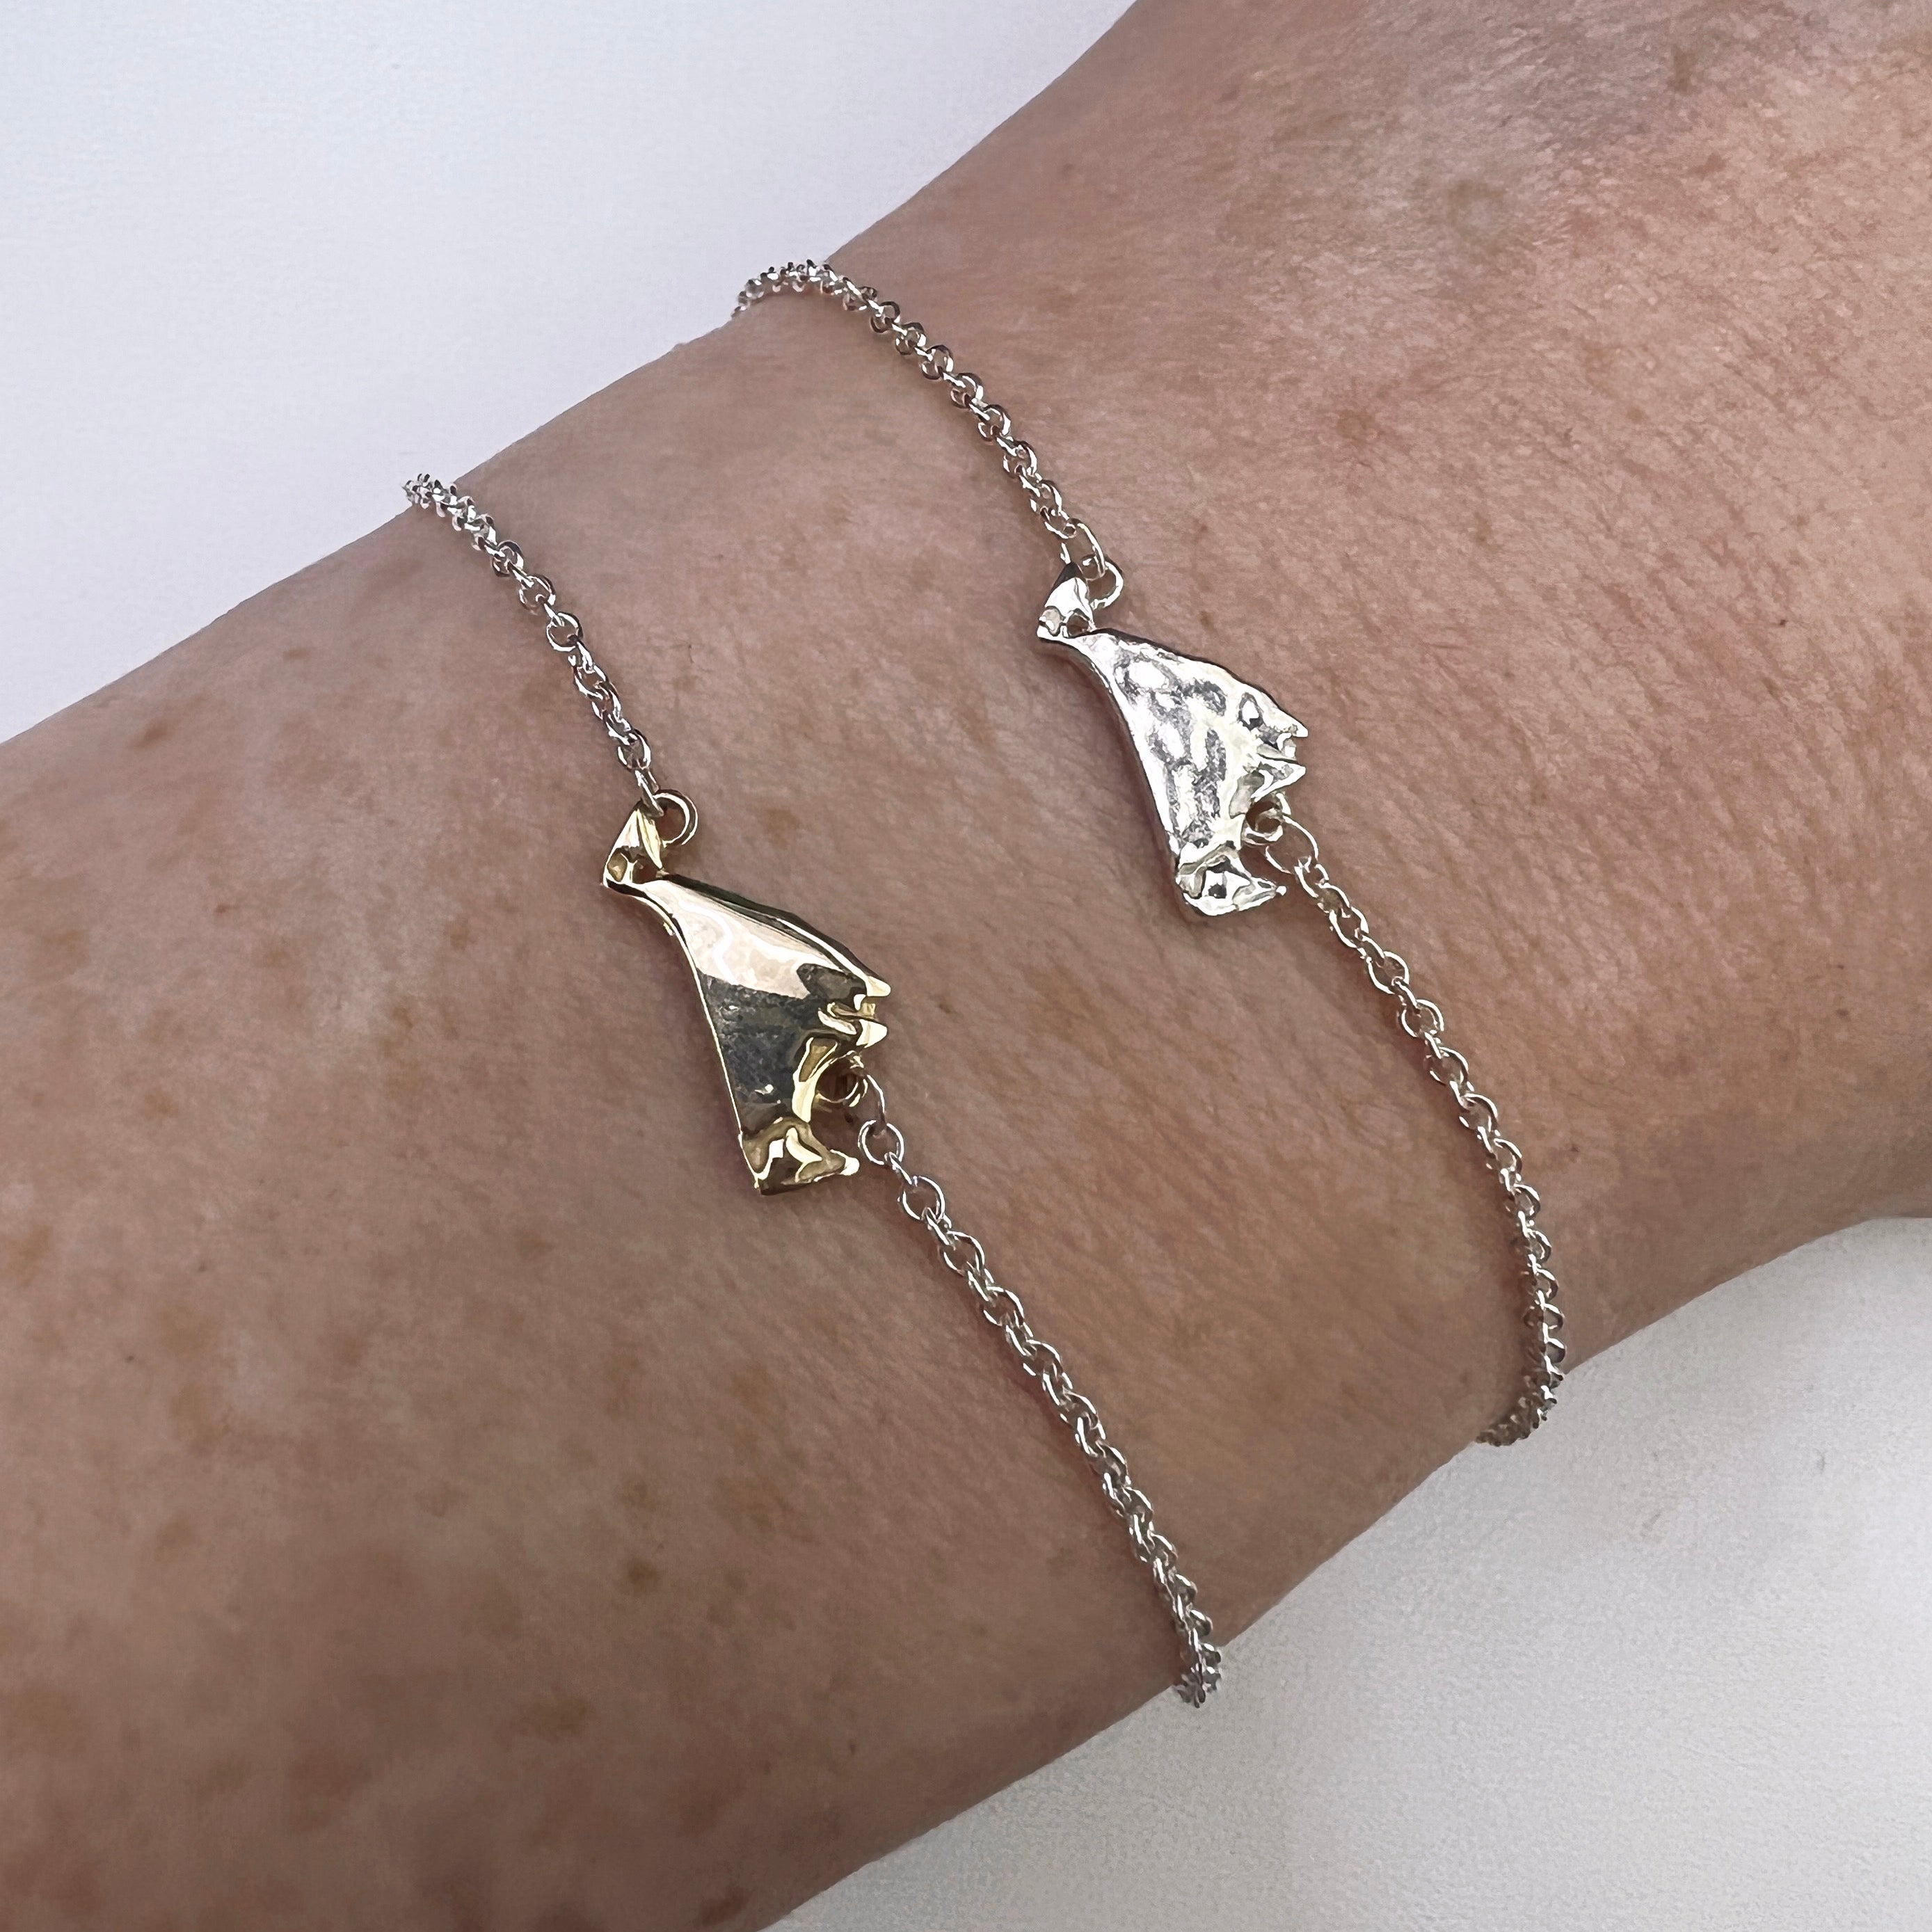 Paper Airplane Bracelet | Plane Snake Chain Charm Bracelet Jewelry :  Amazon.ca: Clothing, Shoes & Accessories